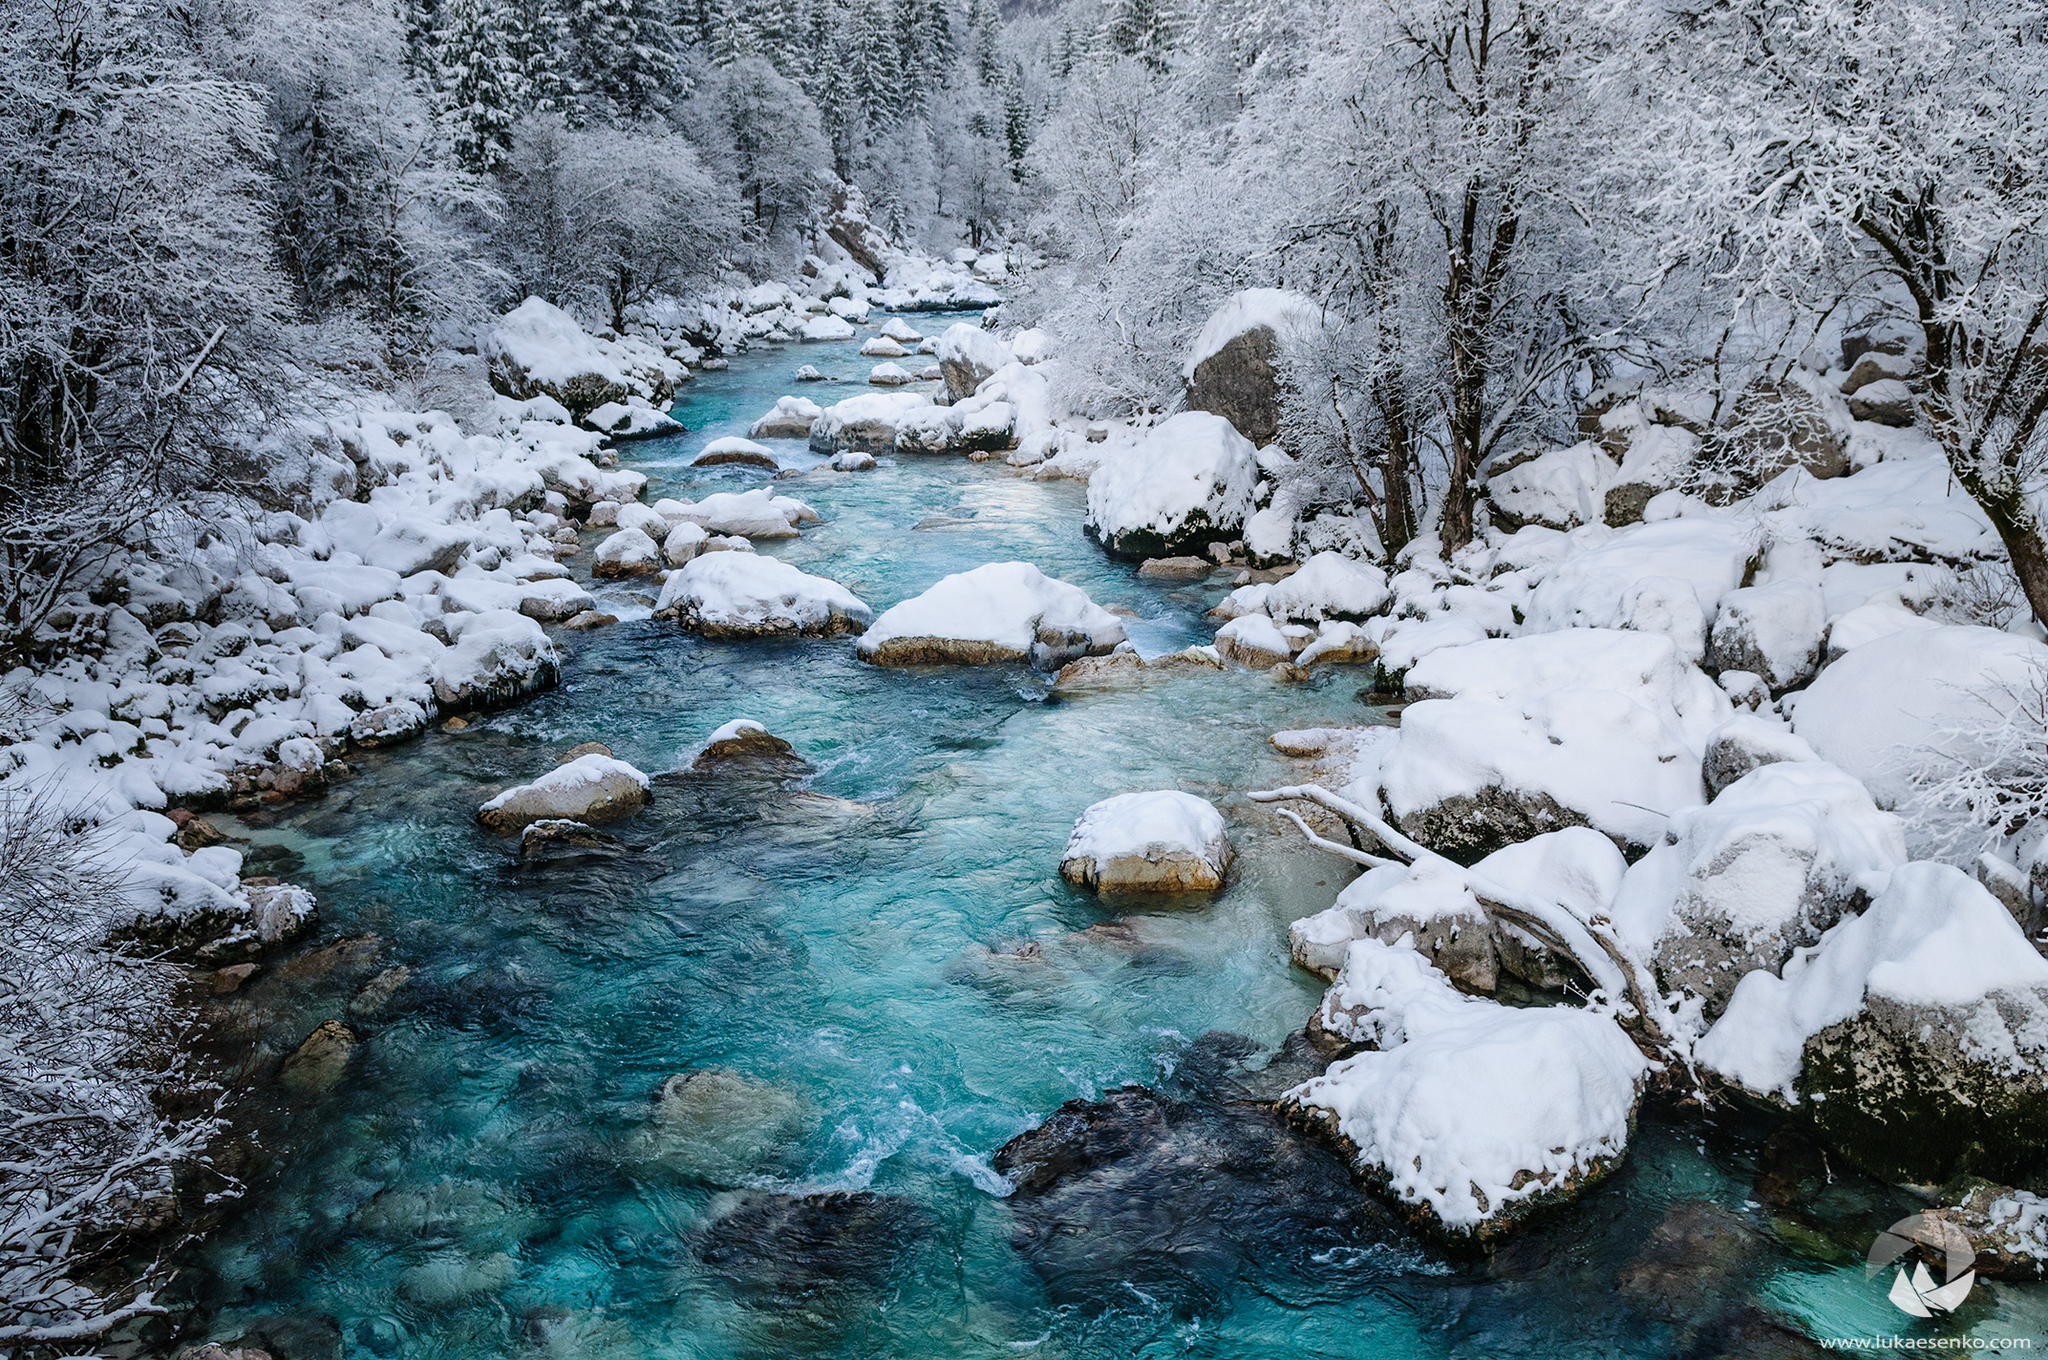 General 2048x1360 winter snow clear water turquoise nature creeks